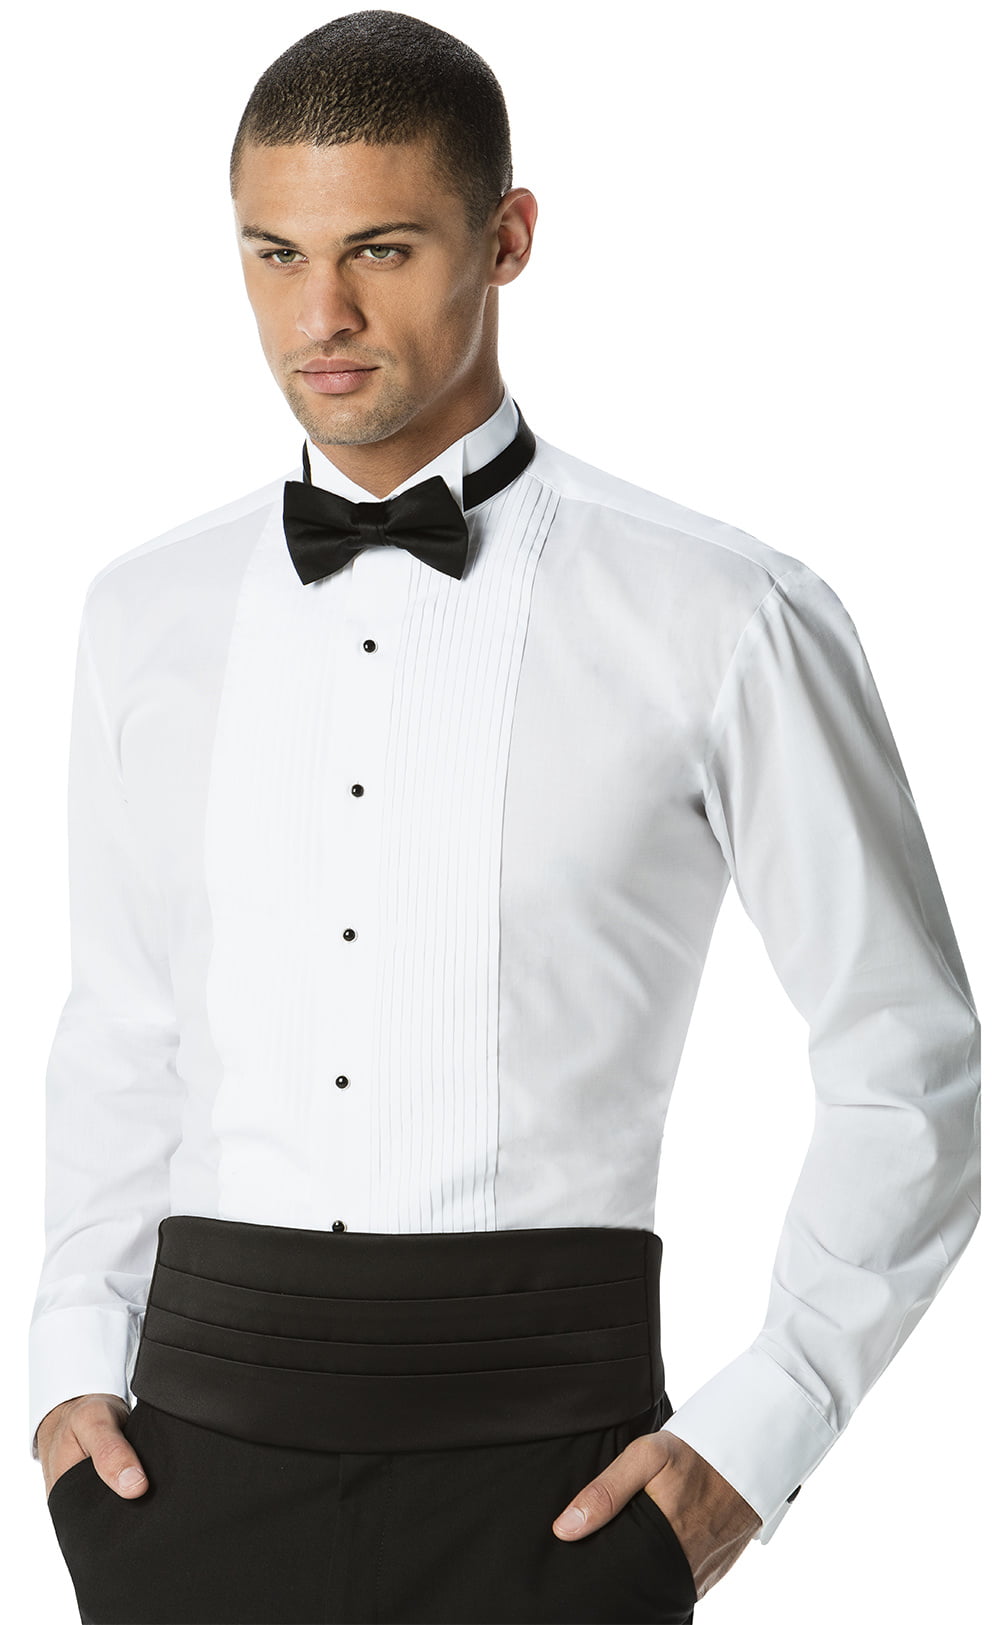 Details about   Men's Formal Bow Tie Fashion Business Wedding Bow Tie Shirt Polyester One Size